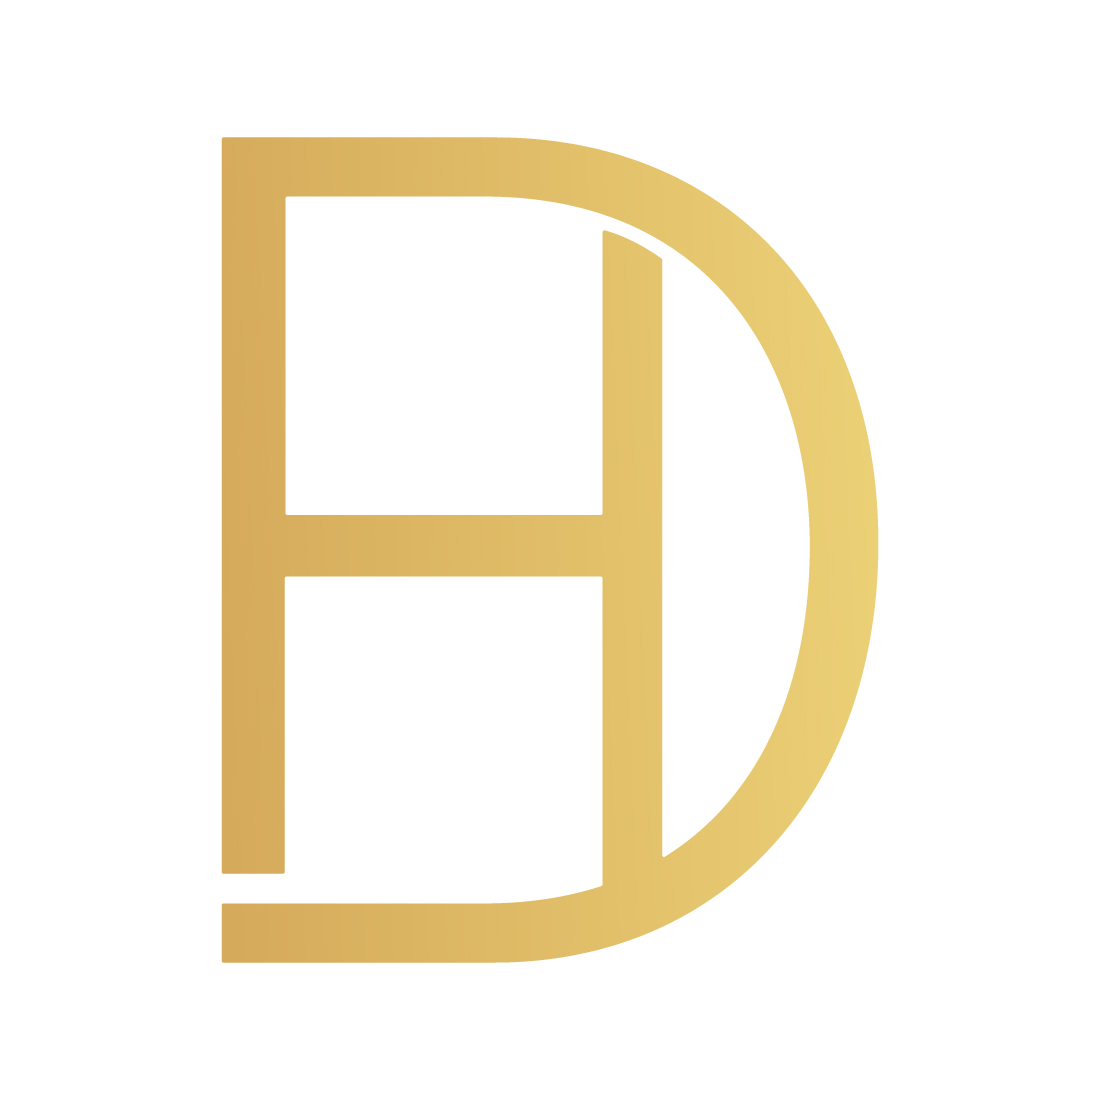 Luxury HD letters logo design vector images HD logo design golden color best icon DH logo design monogram best company identity preview image.